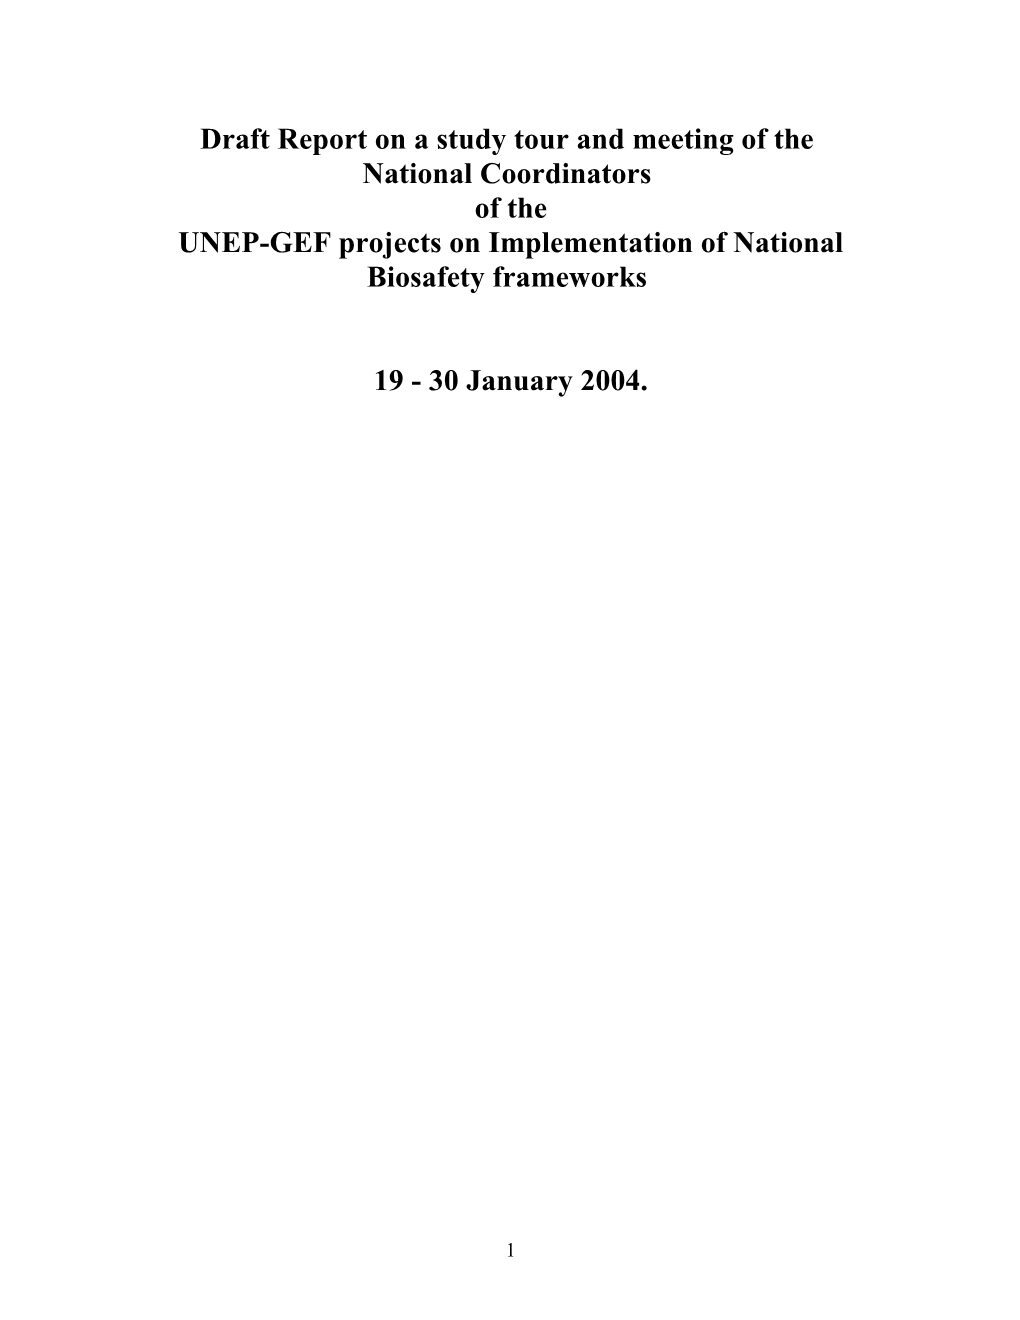 Meeting of the National Coordinators of the UNEP-GEF Projects on Implementation of National